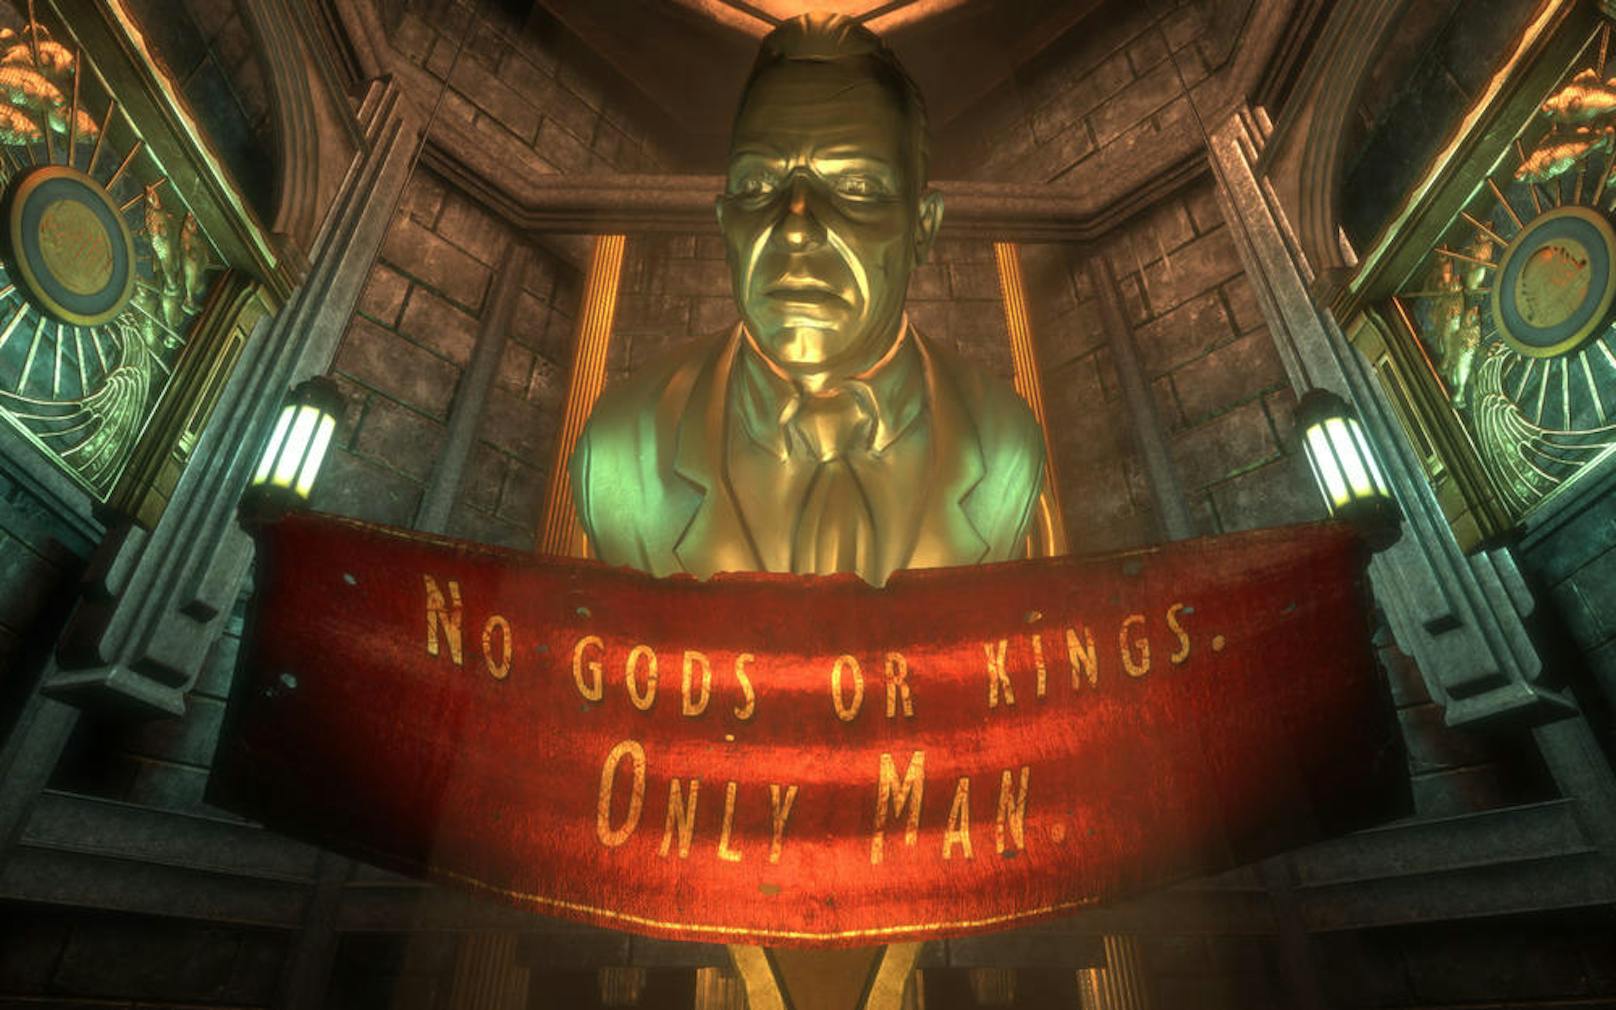  <a href="https://www.heute.at/digital/games/story/BioShock-The-Collection-im-Test--dystopisches-Epos-44566825" target="_blank">Bioshock: The Collection</a>